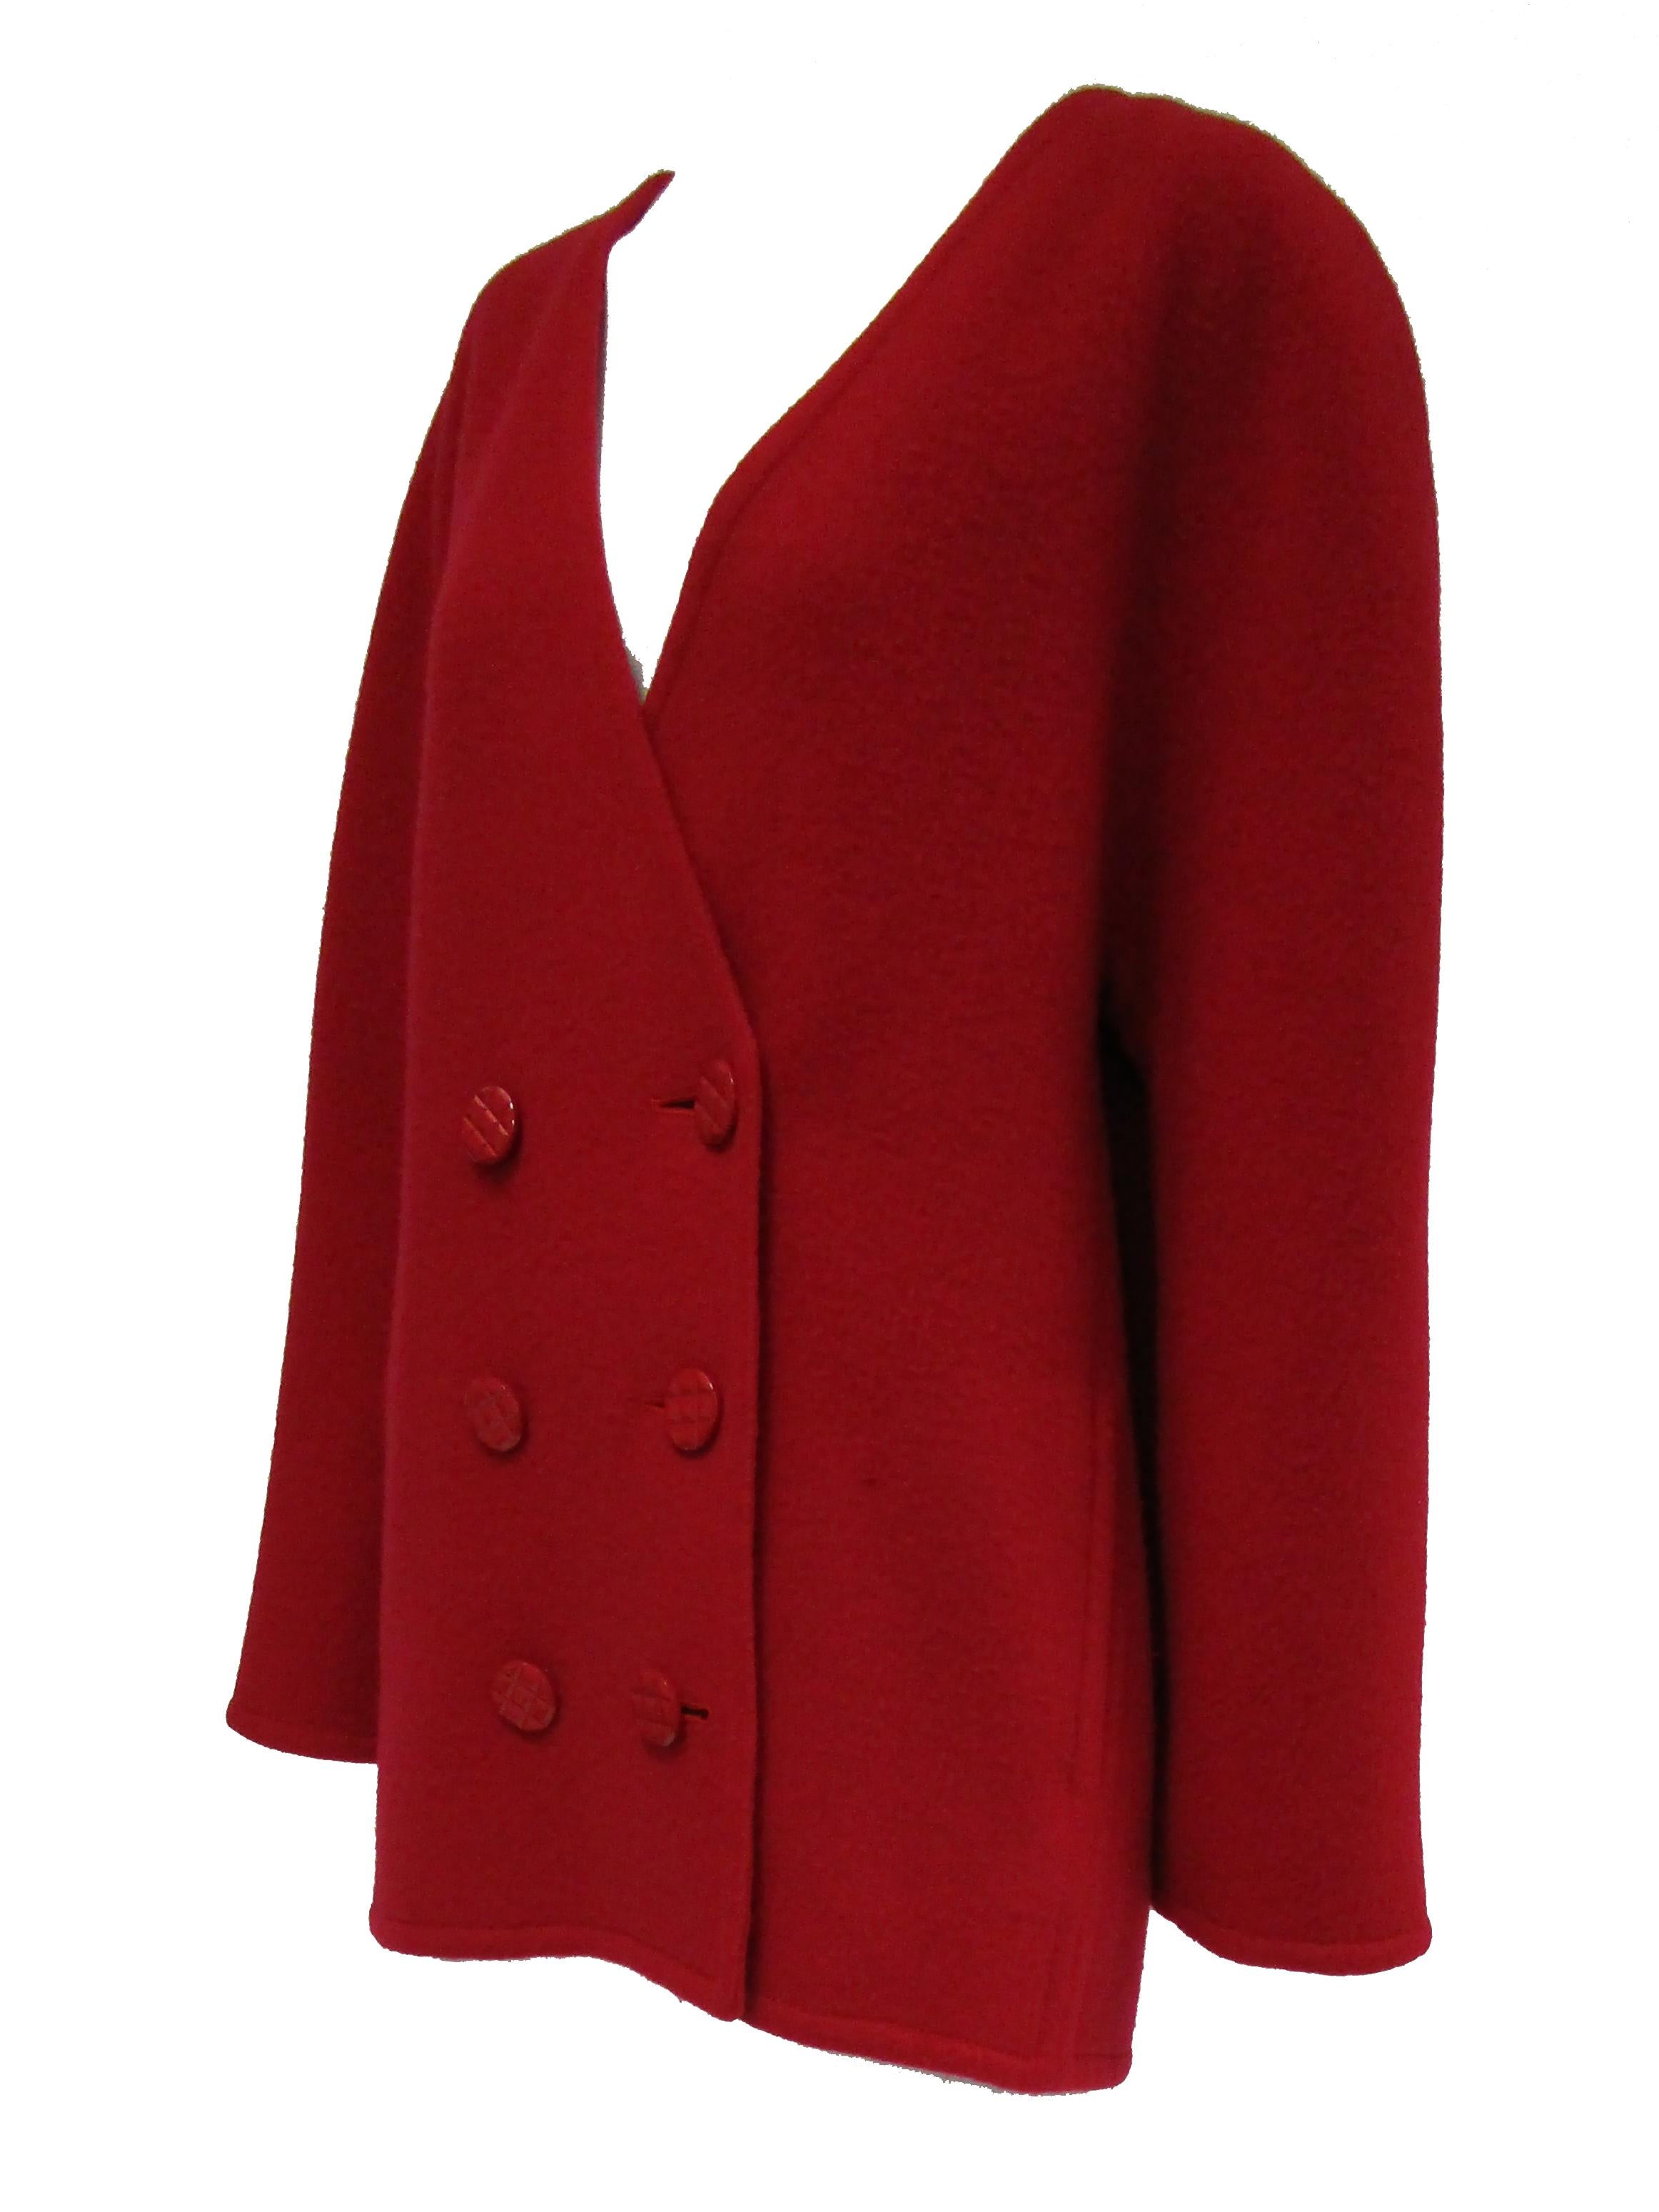  @ La Souer 
Striking bright red jacket by Galanos! This jacket is hip length, with long sleeves and a deep V - neckline. The jacket has rounded, sloping shoulders that give it an avant gard look. The jacket is double breasted with six red acrylic